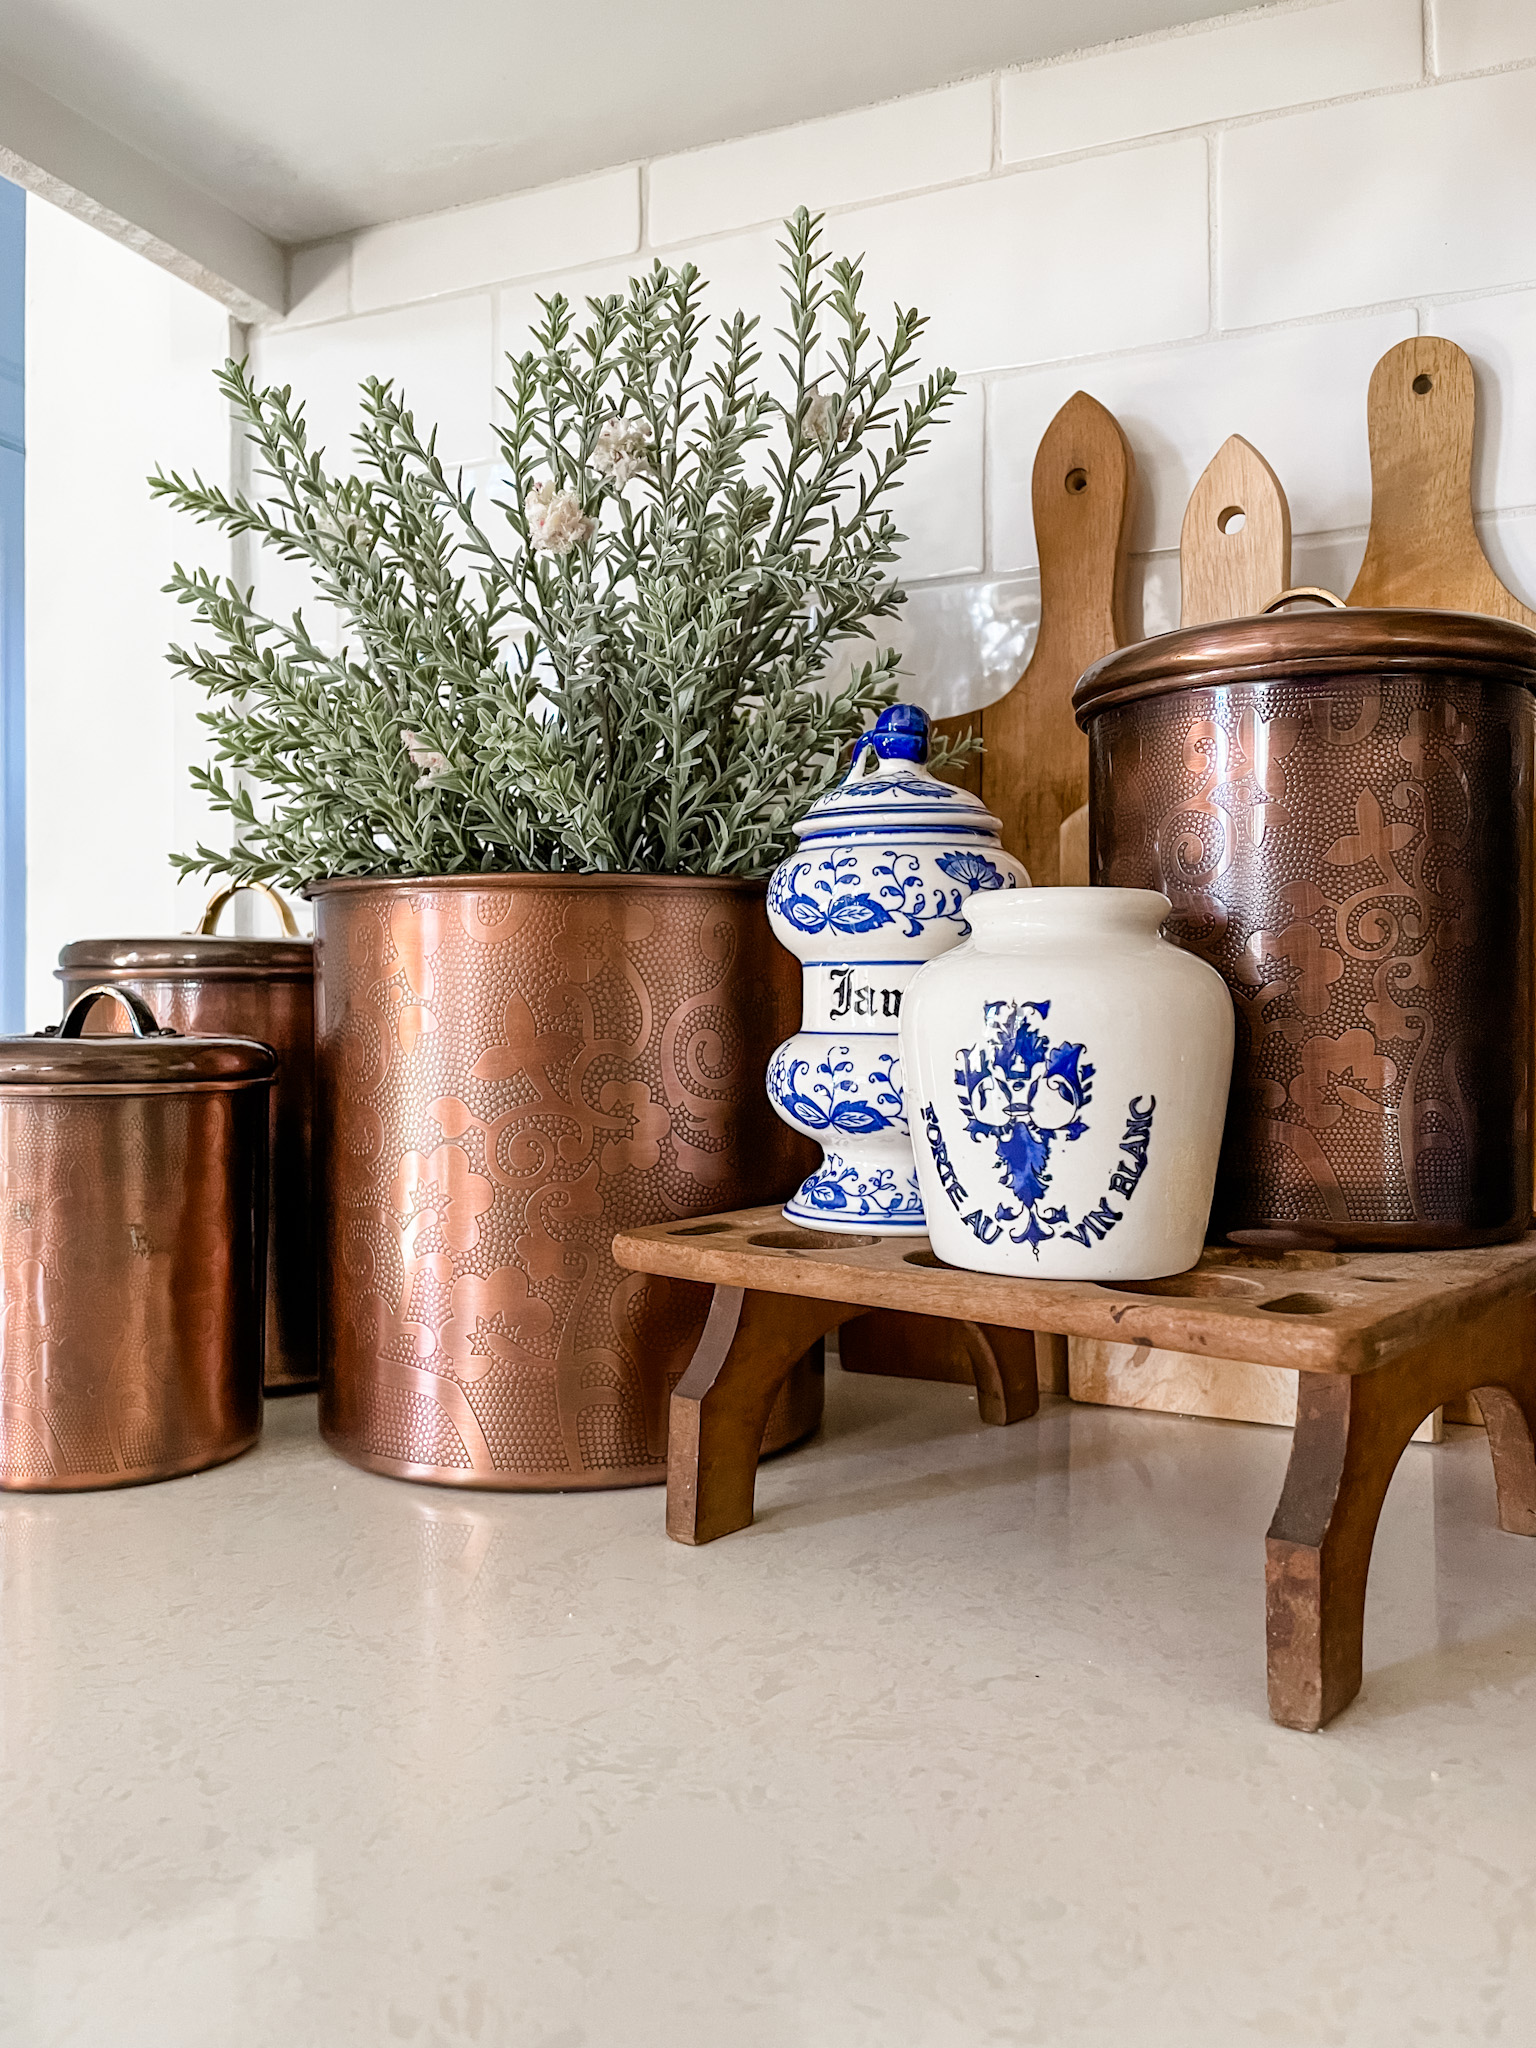 Vintage inspired kitchen counter canisters.